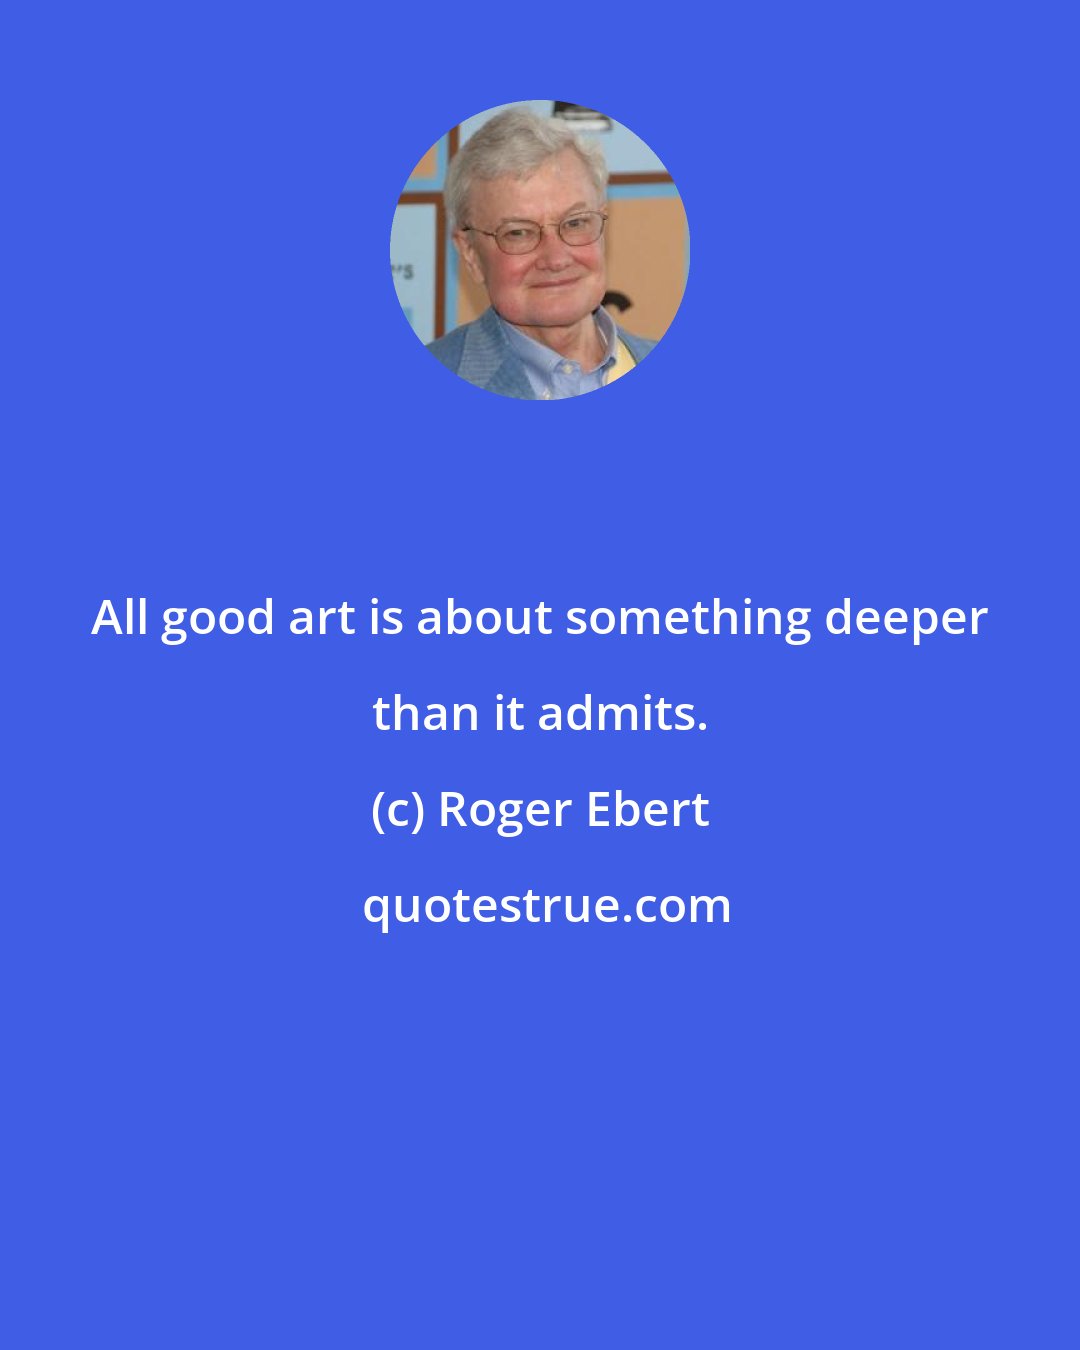 Roger Ebert: All good art is about something deeper than it admits.